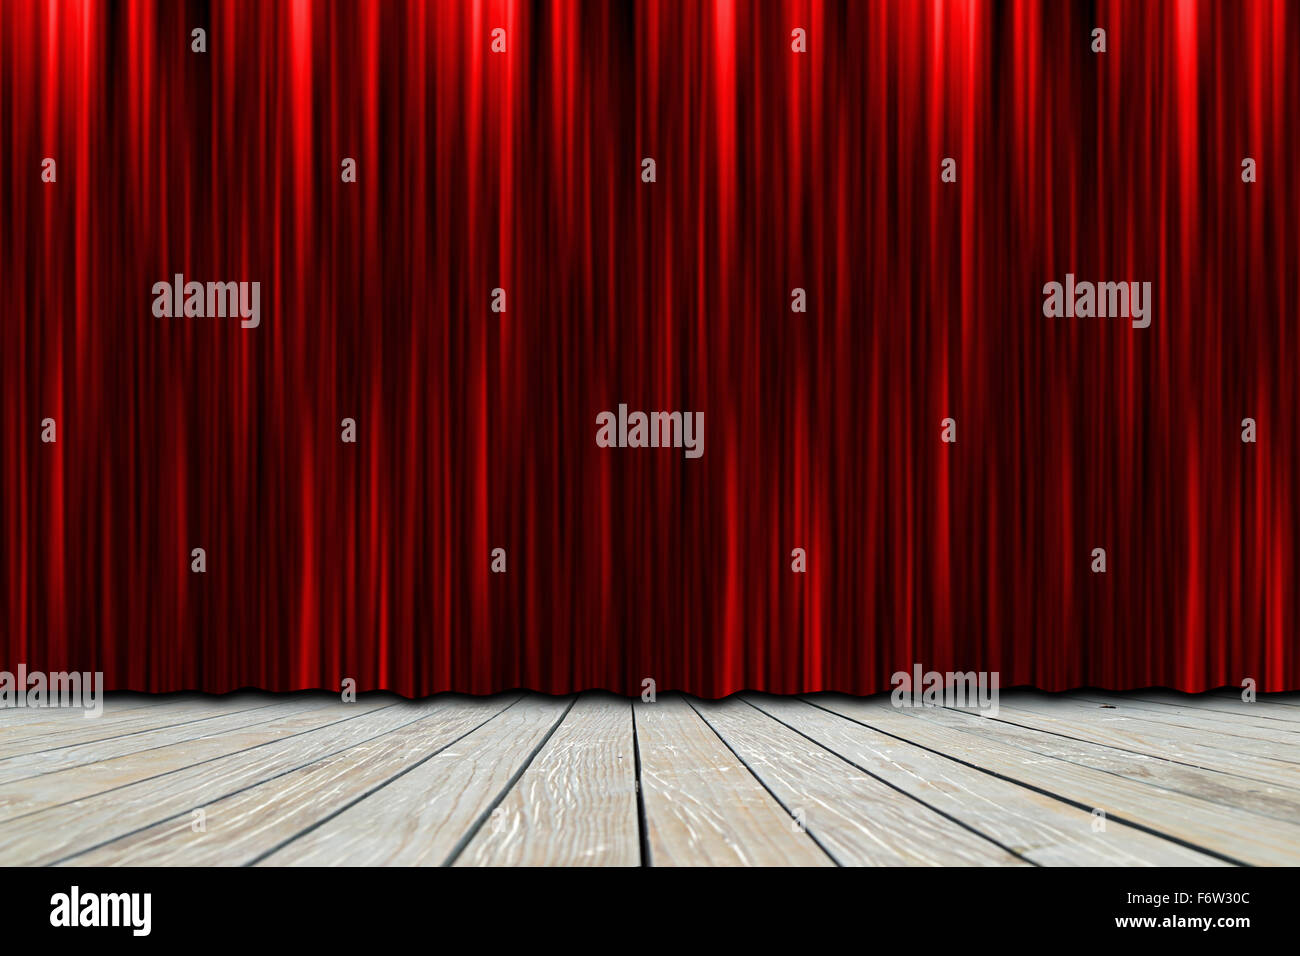 wooden theater stage with red curtains Stock Photo